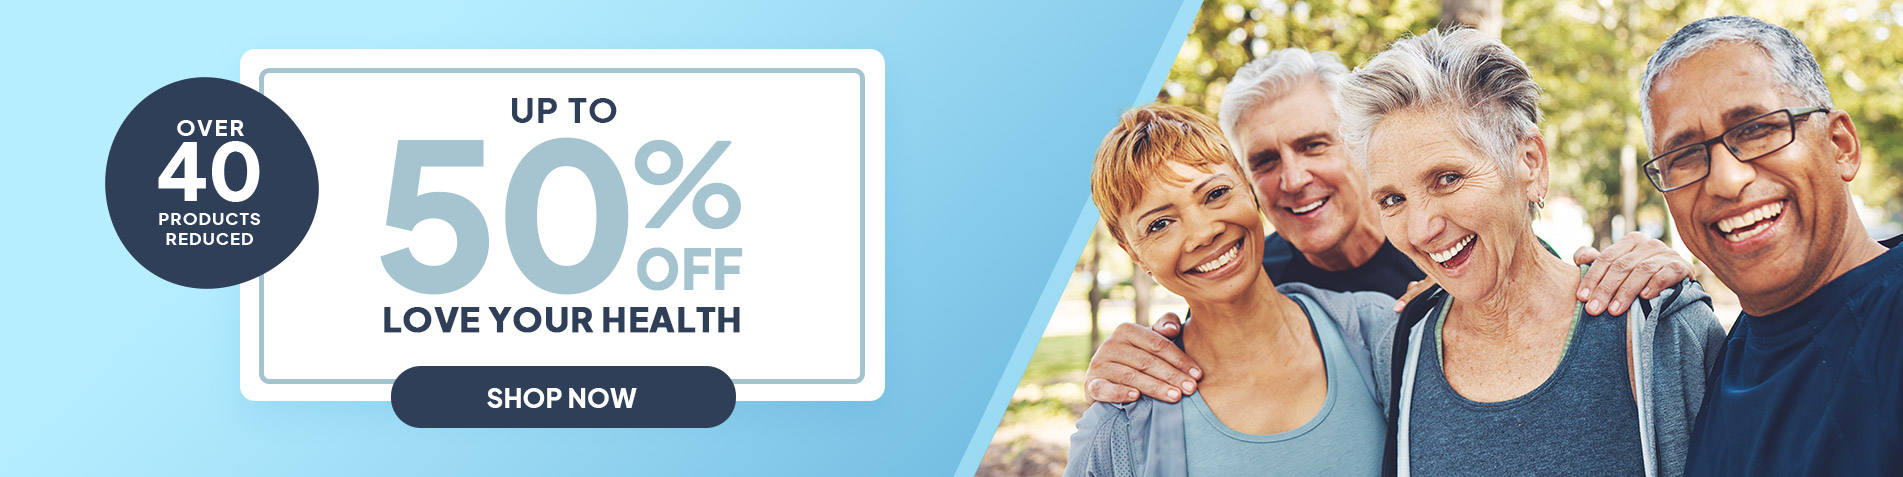 Over 40 products reduced - Up to 50% off - Love your health - Shop now